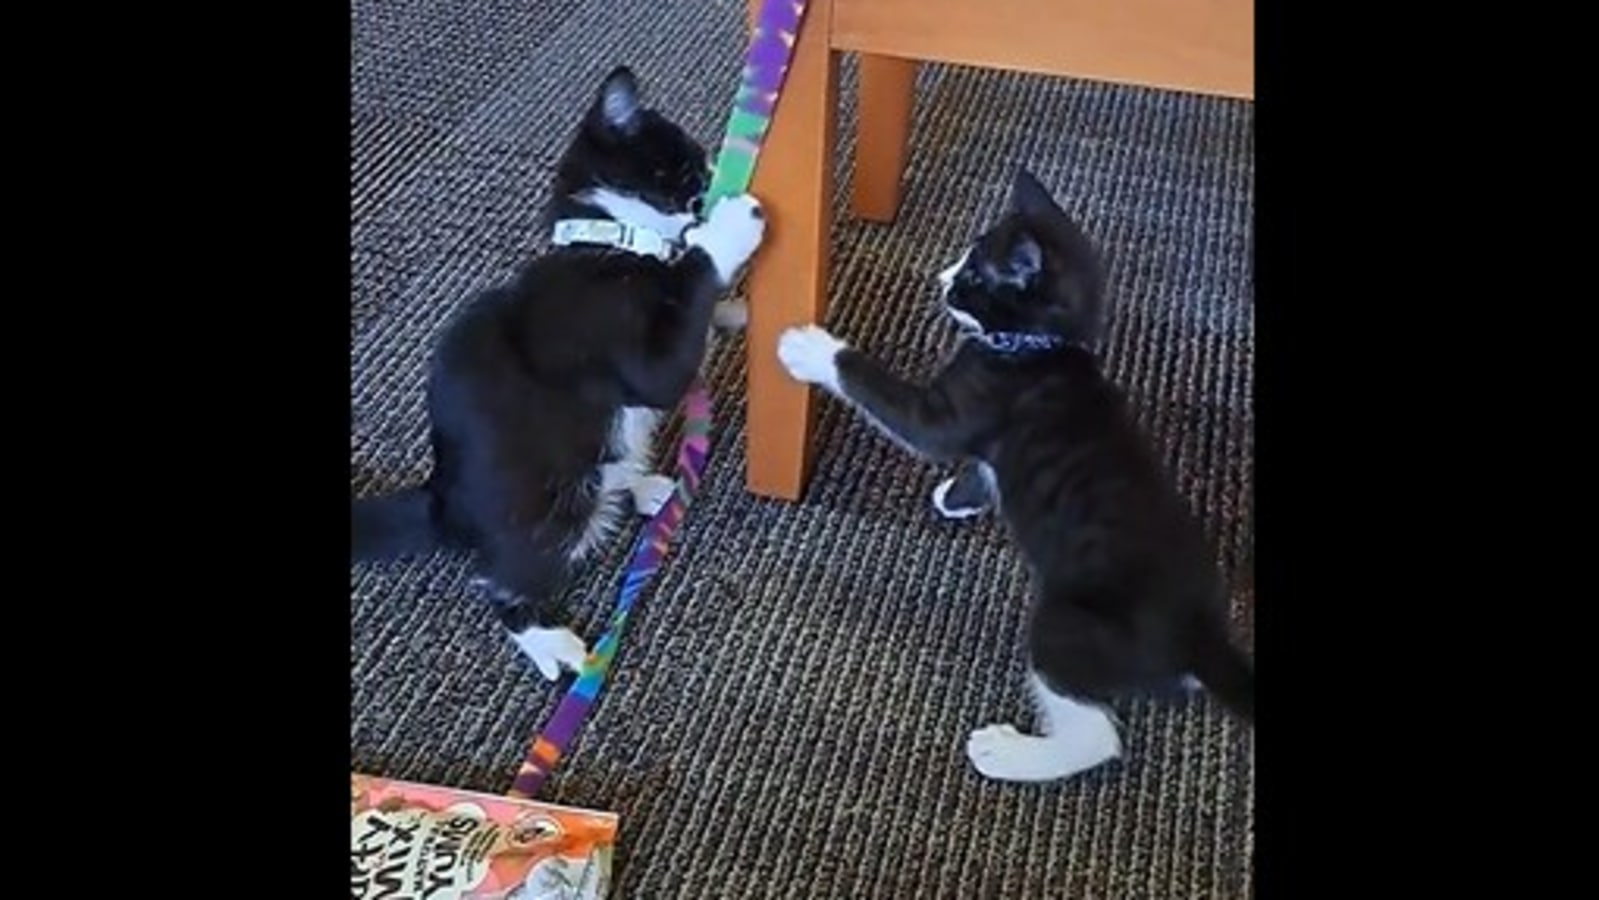 Are these little kittens fighting or playing? Watch Reddit video to find out Trending